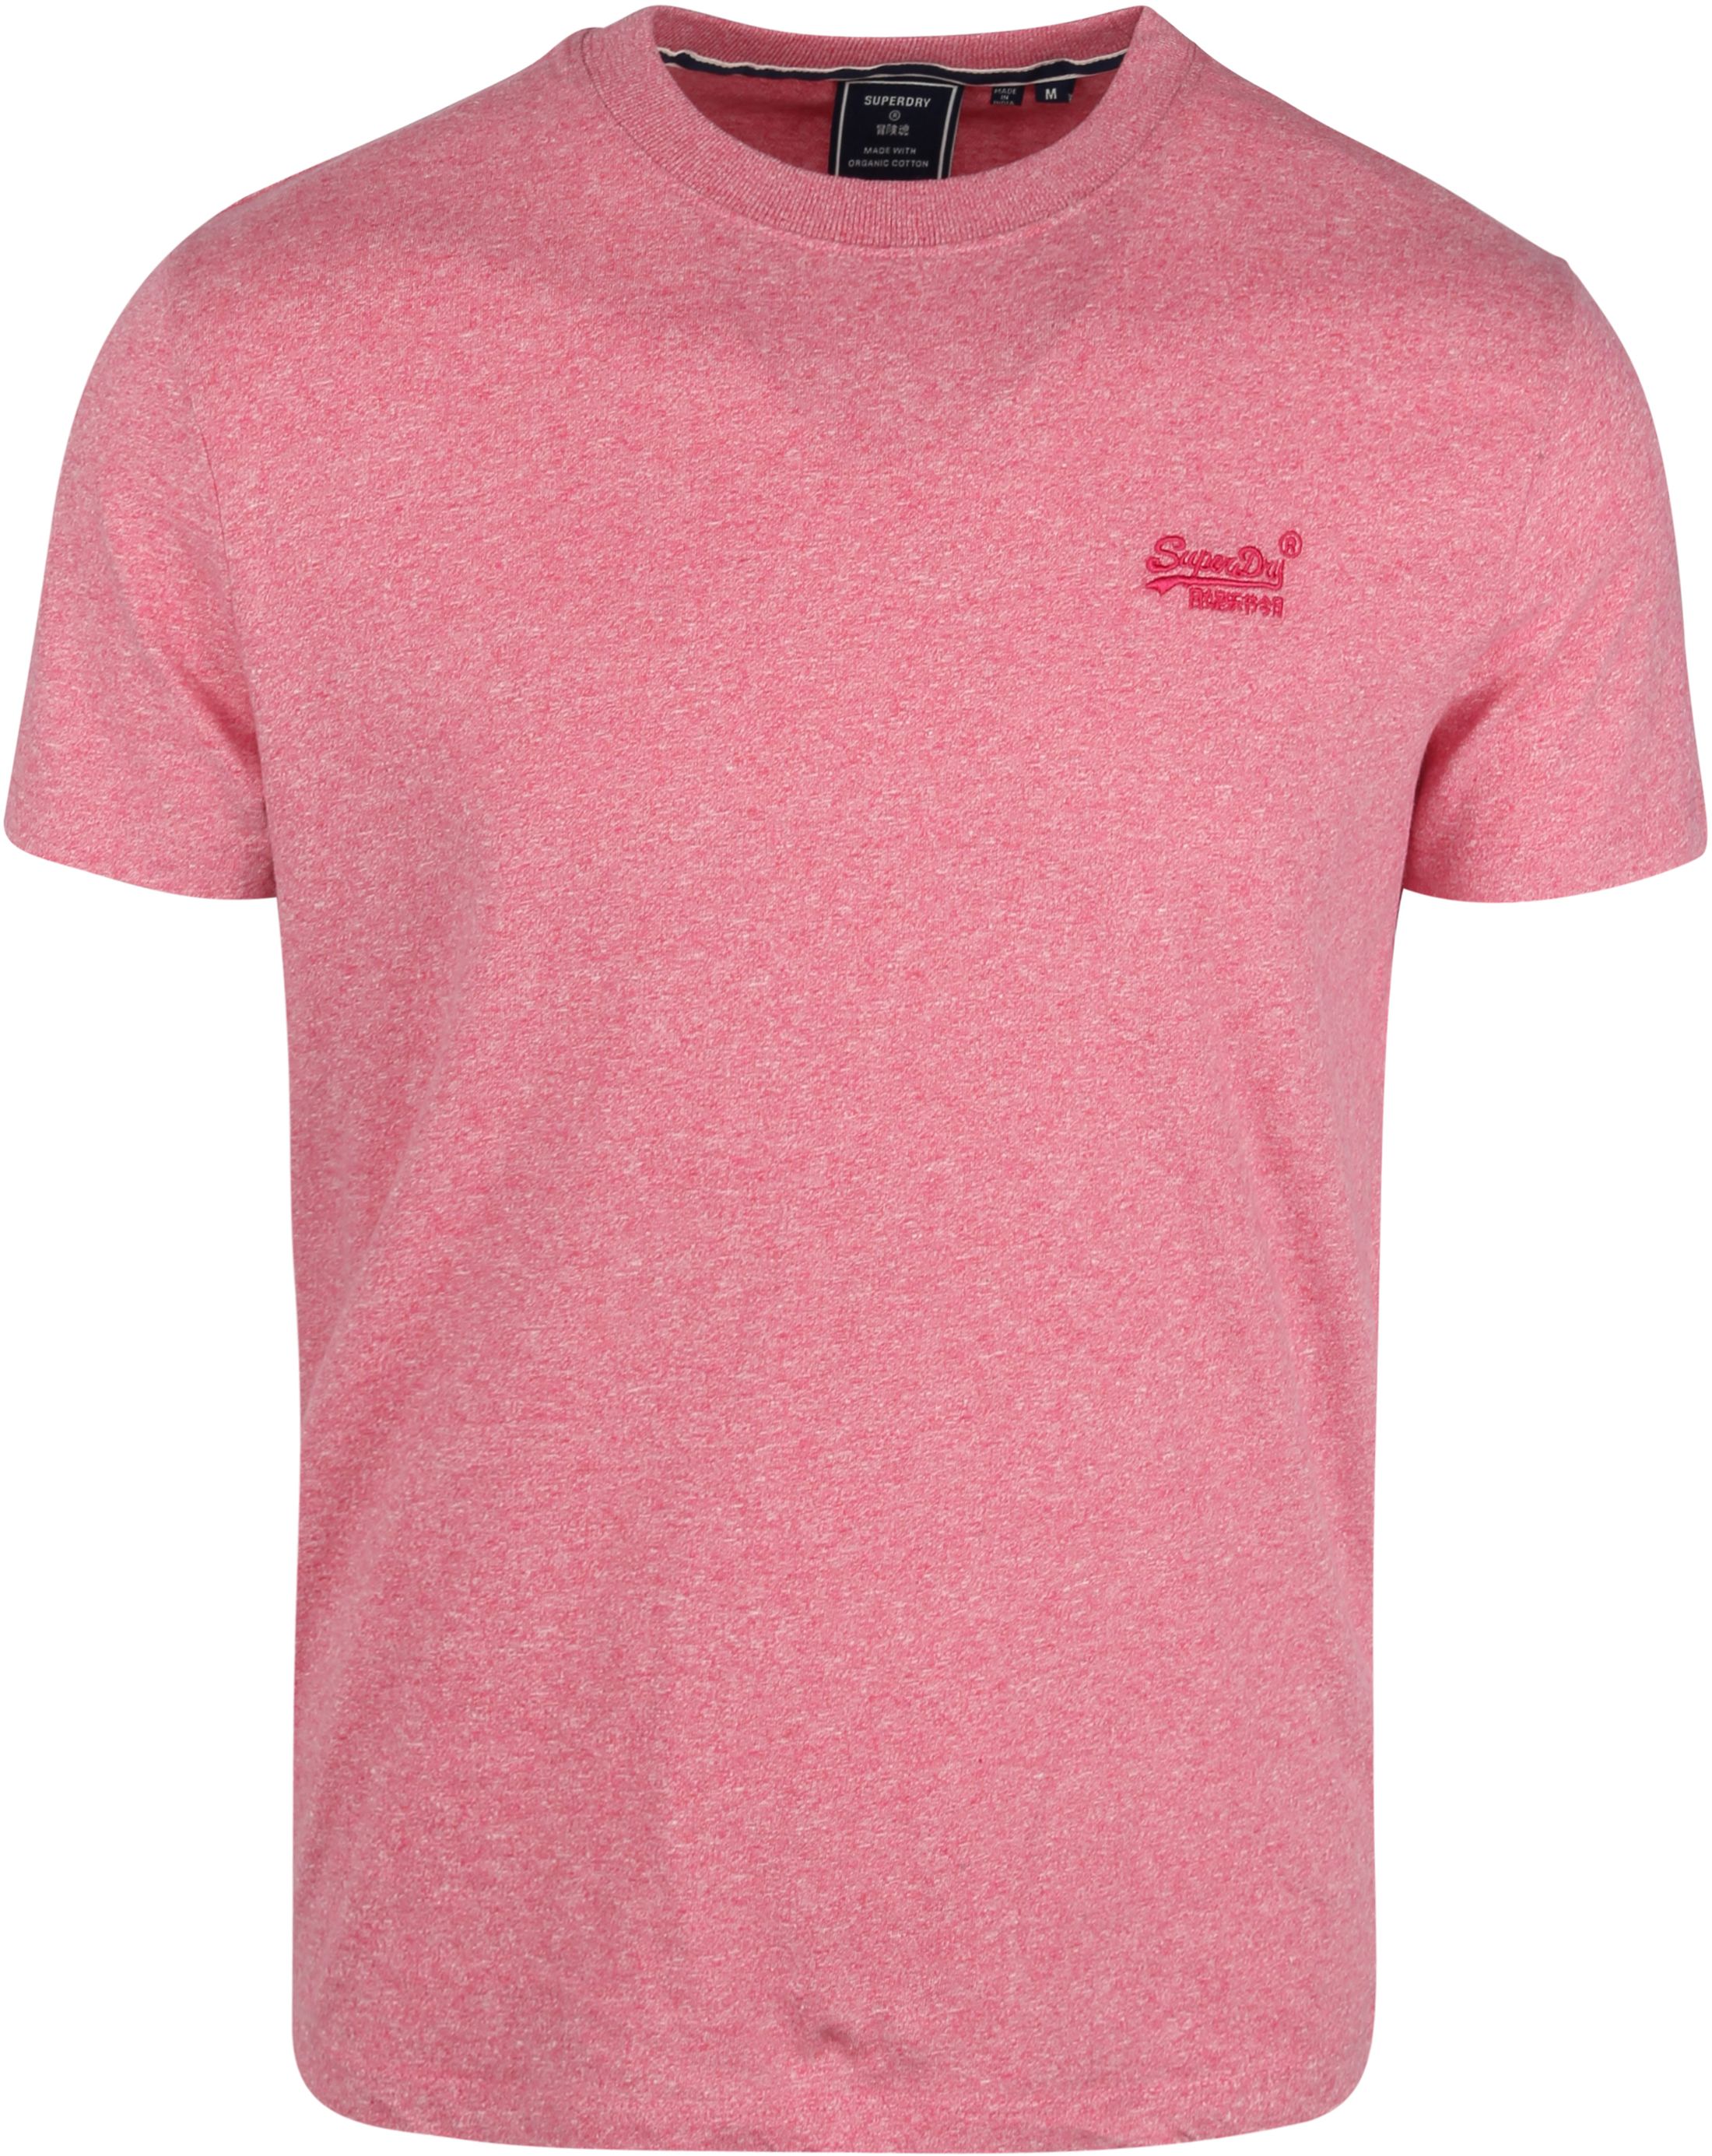 Superdry Classic T Shirt Pink size L